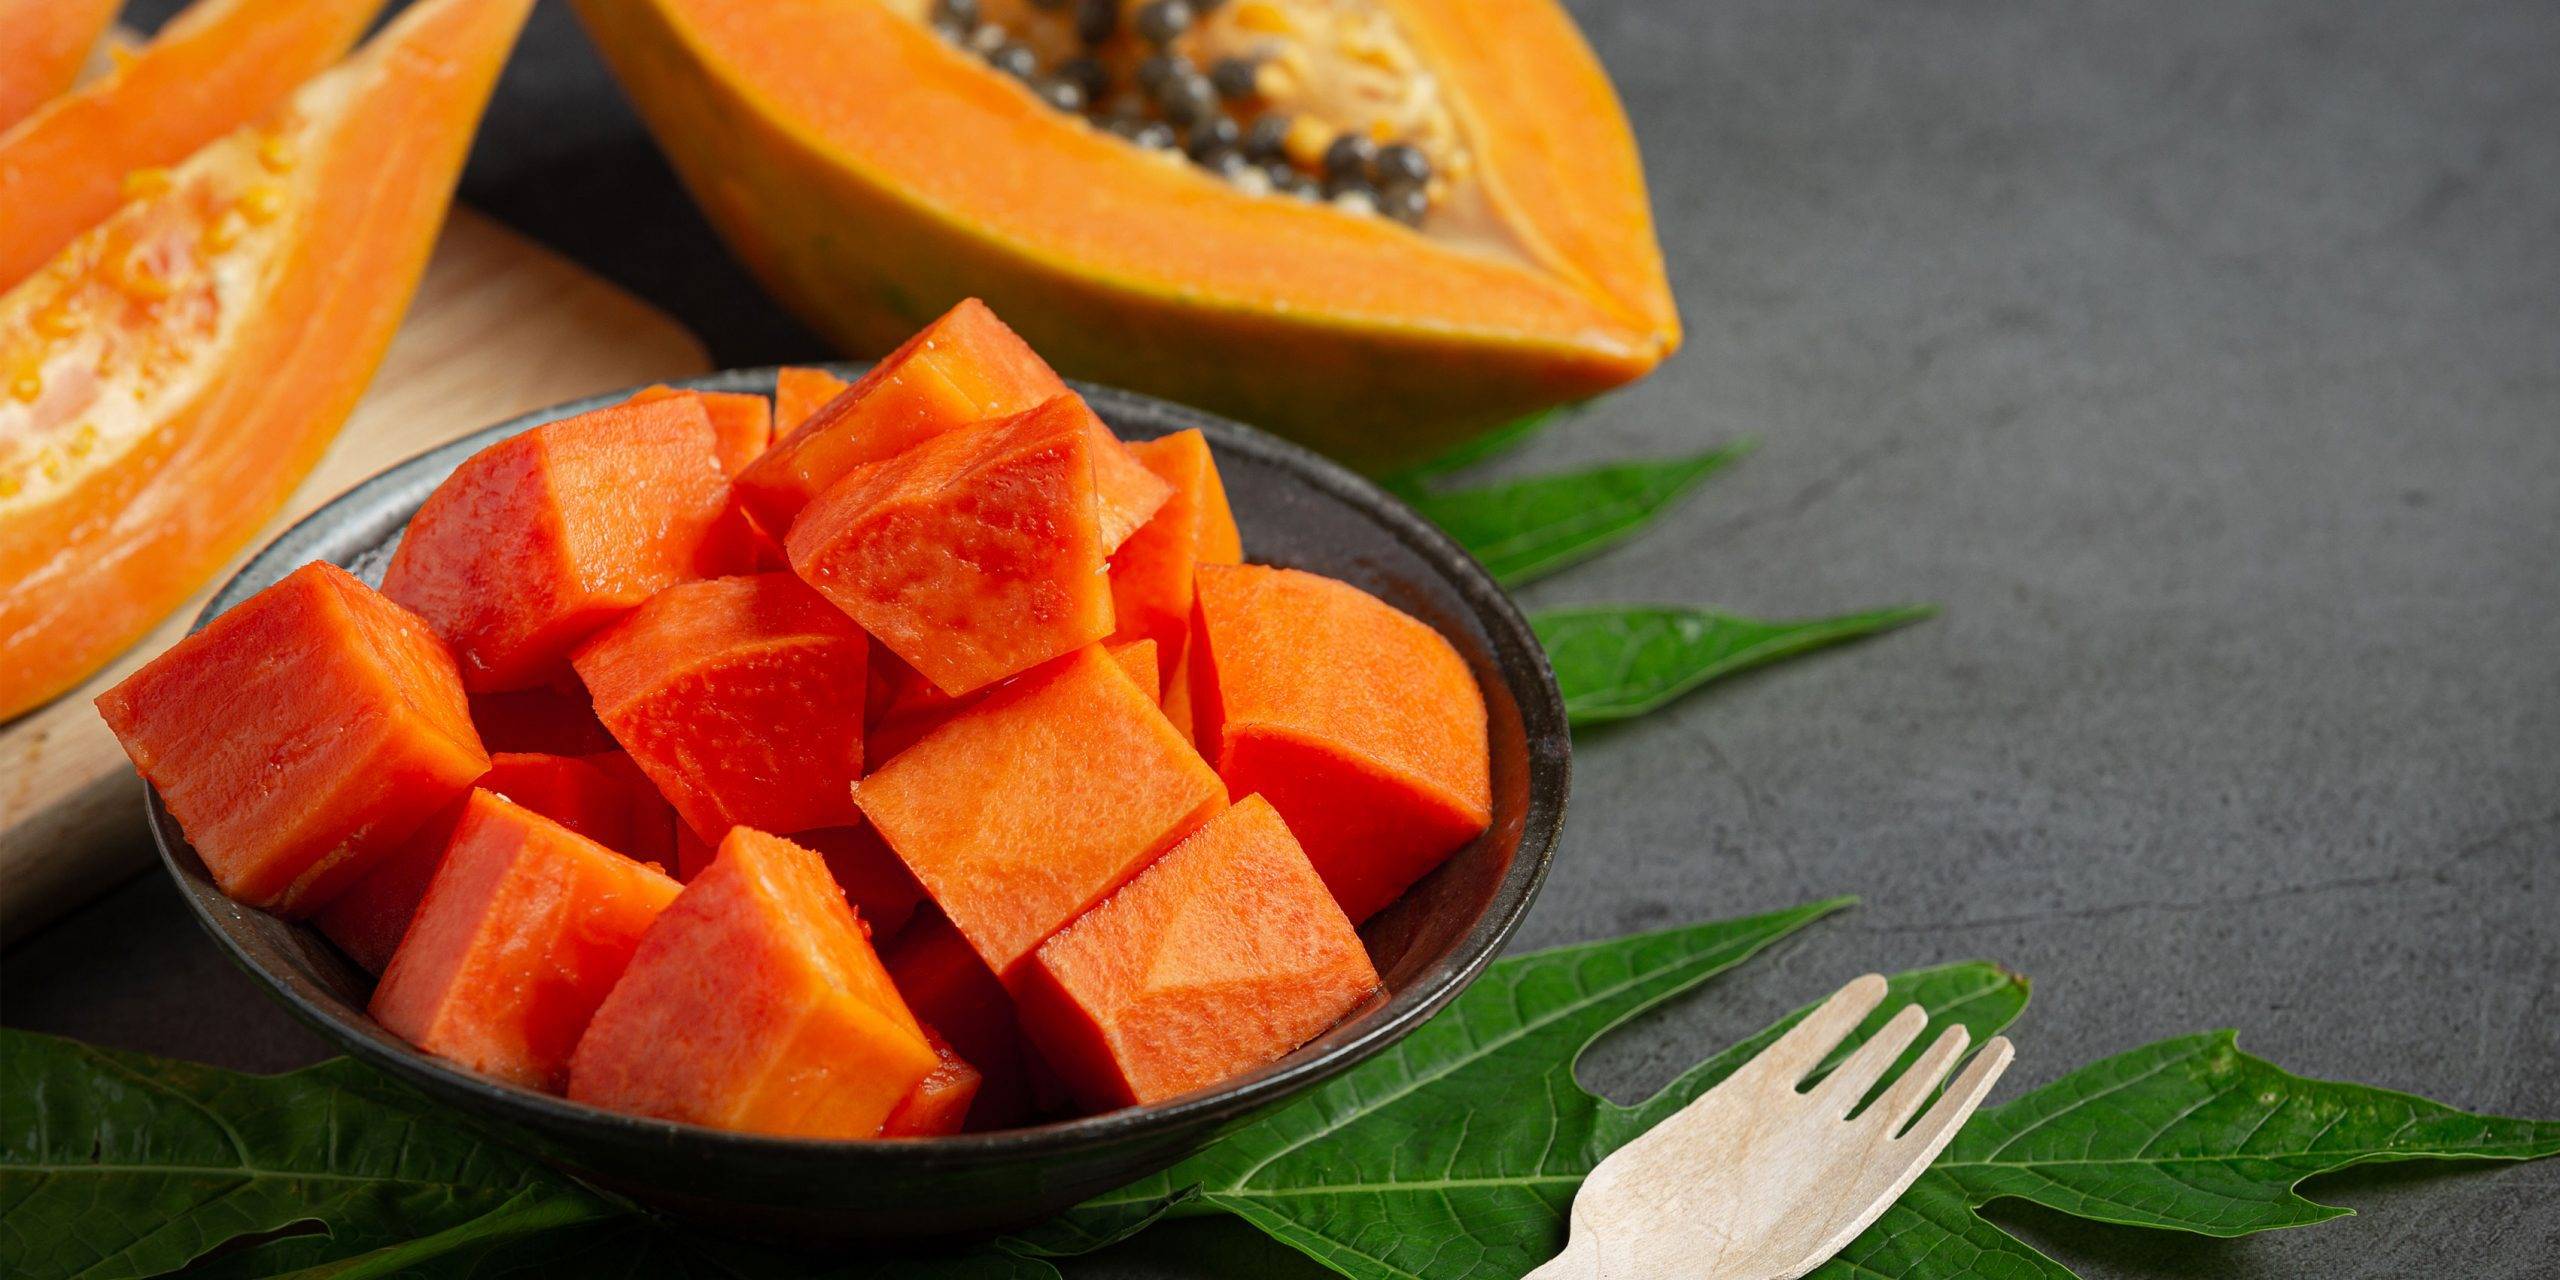 Papaya to add in your diet healthy miracles will happen in your body